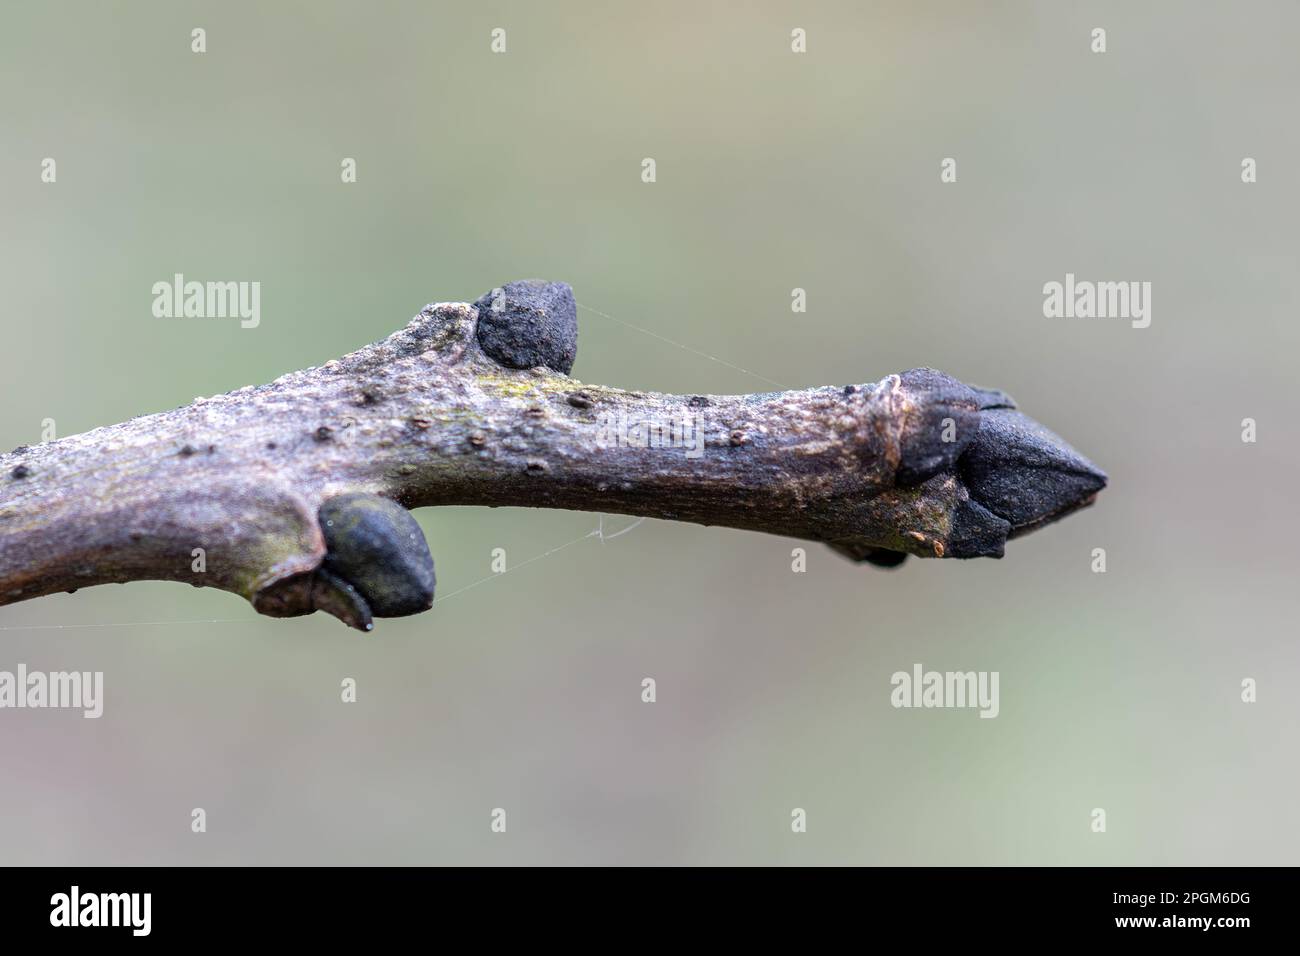 Ash tree (Fraxinus excelsior) close-up showing the black buds, England, UK, during spring Stock Photo